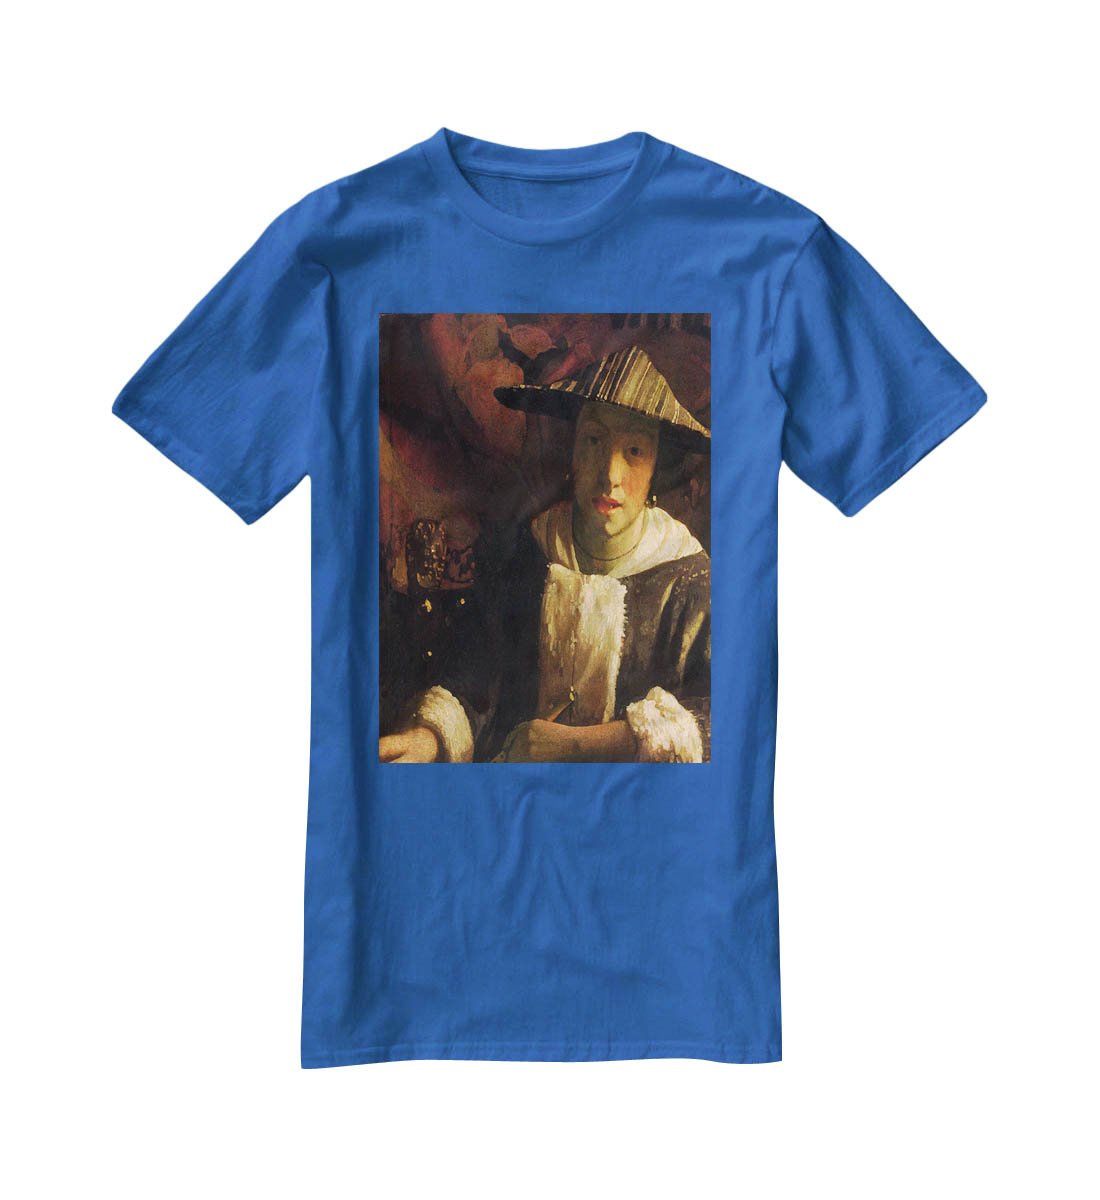 Girl with a flute by Vermeer T-Shirt - Canvas Art Rocks - 2